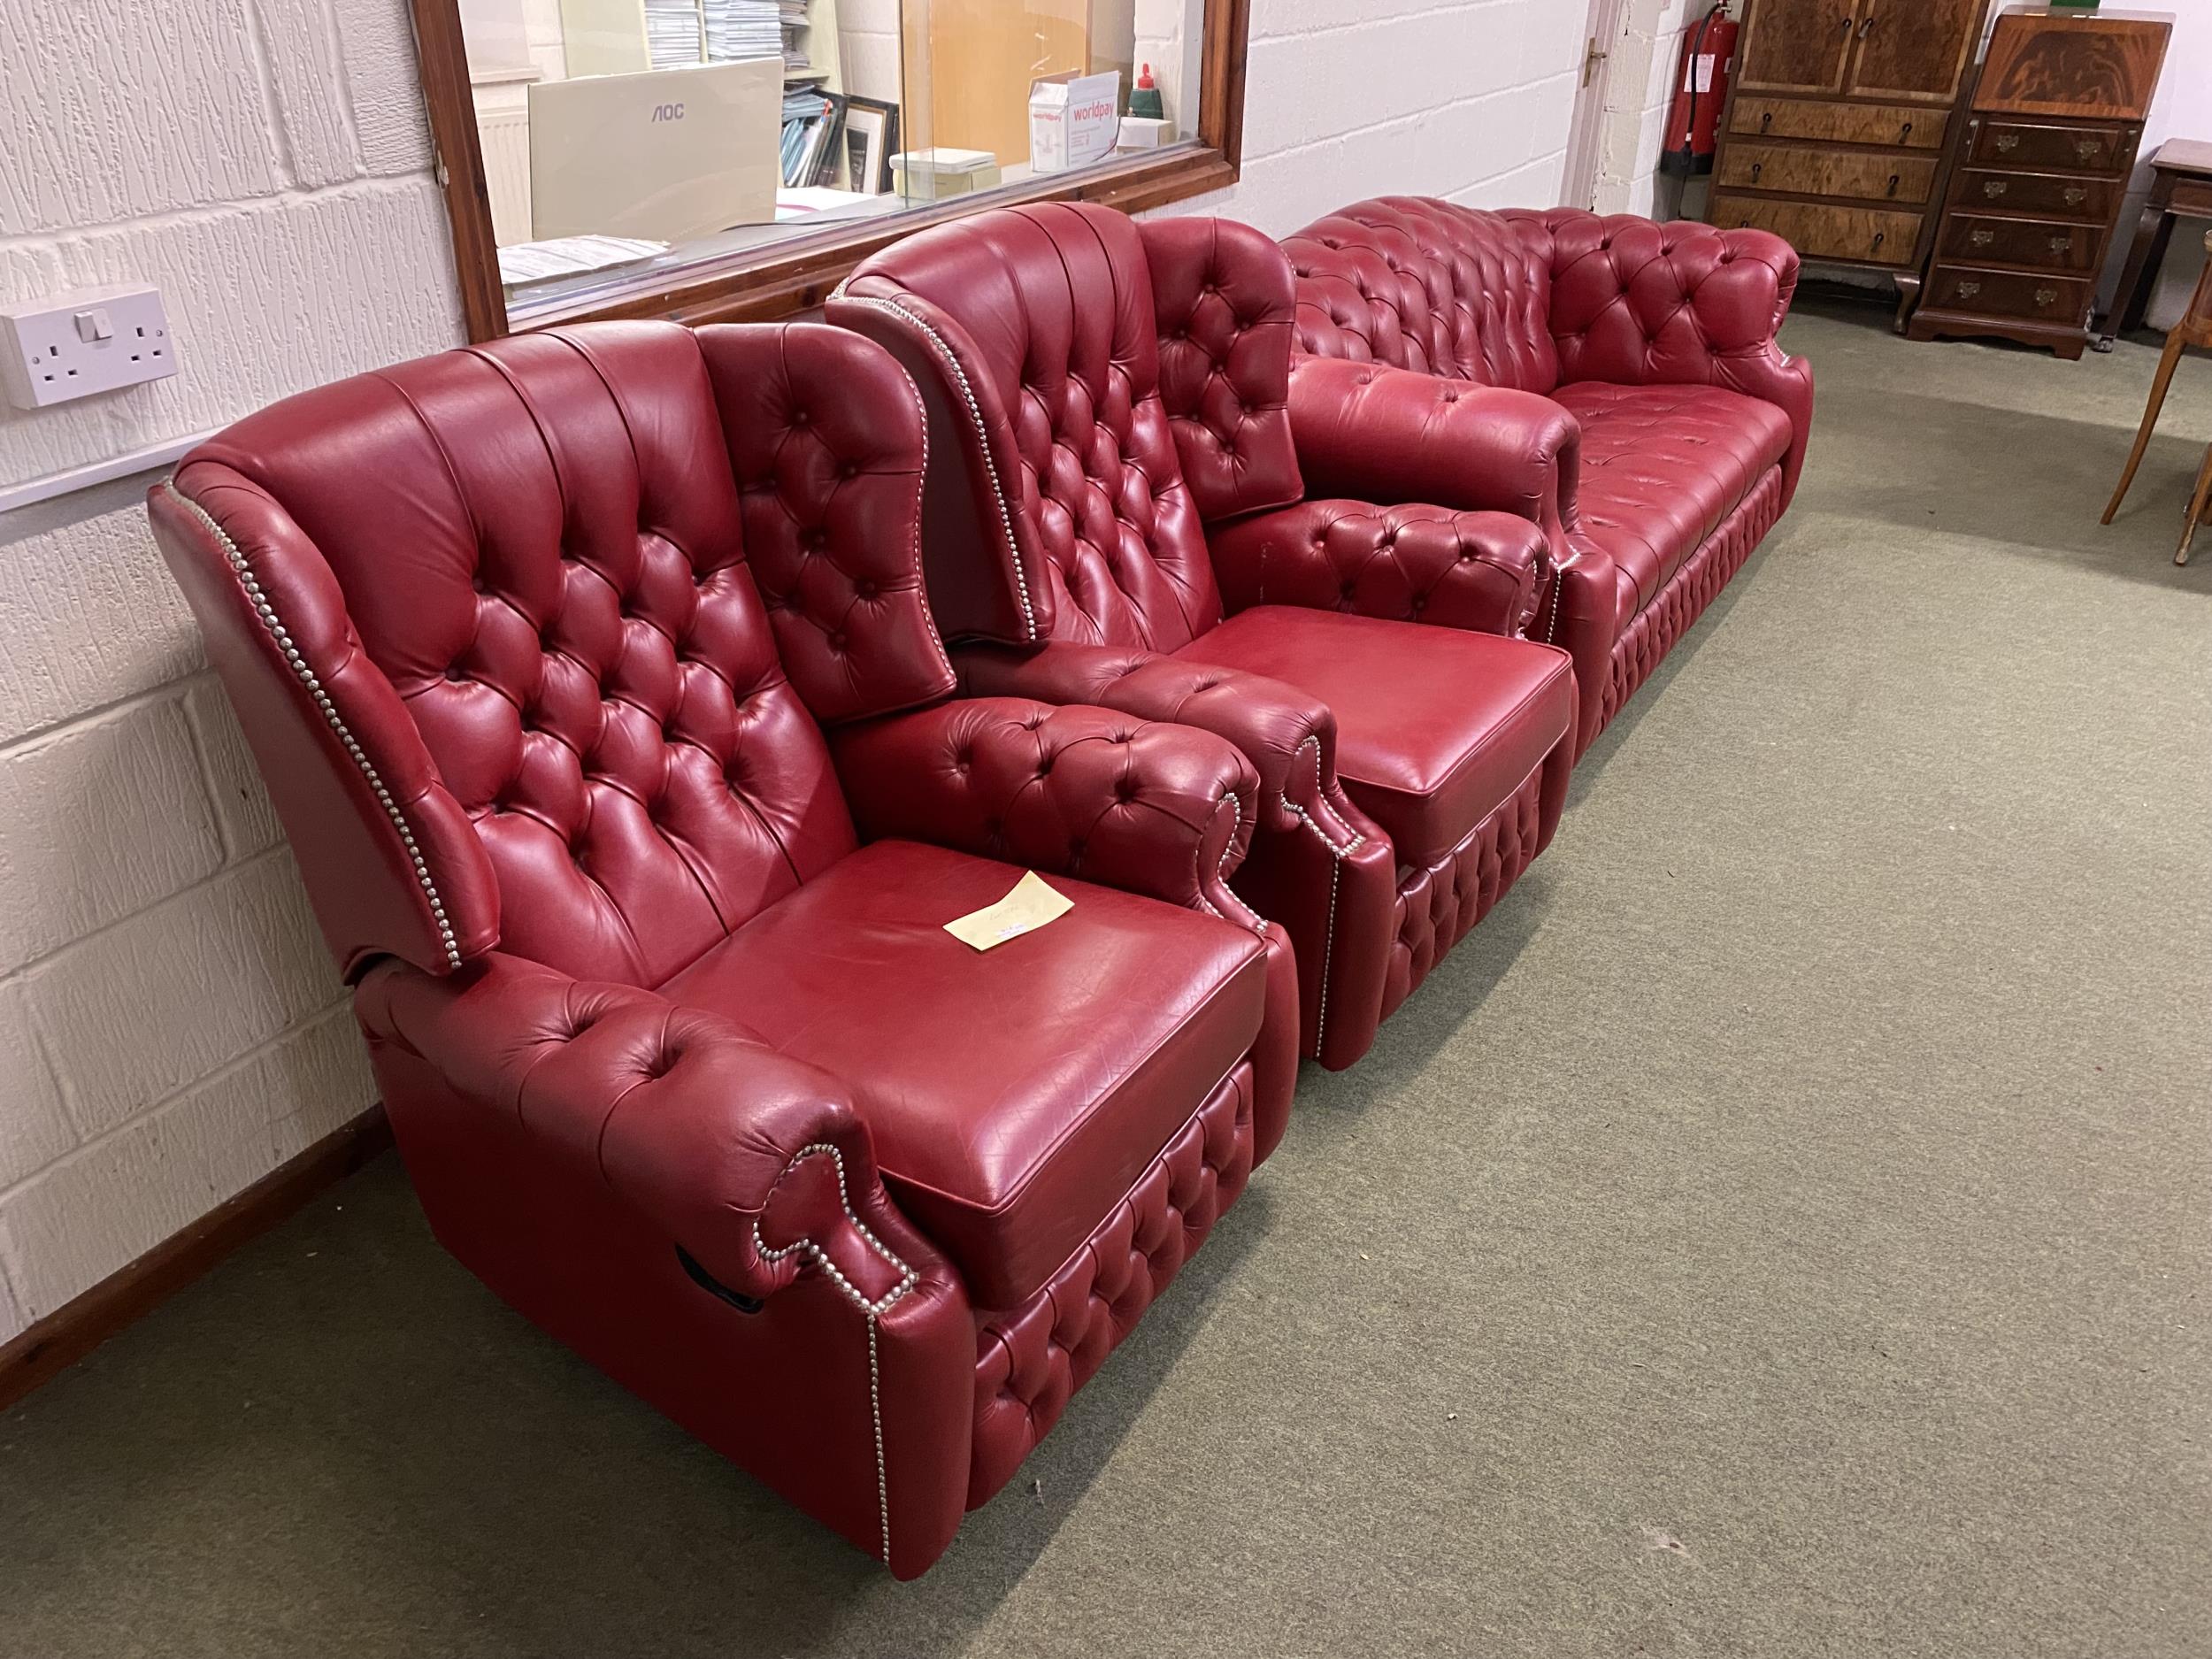 Red leather button back and studd Chesterfield style sofa and pair of reclining chairs (with fire - Image 2 of 3